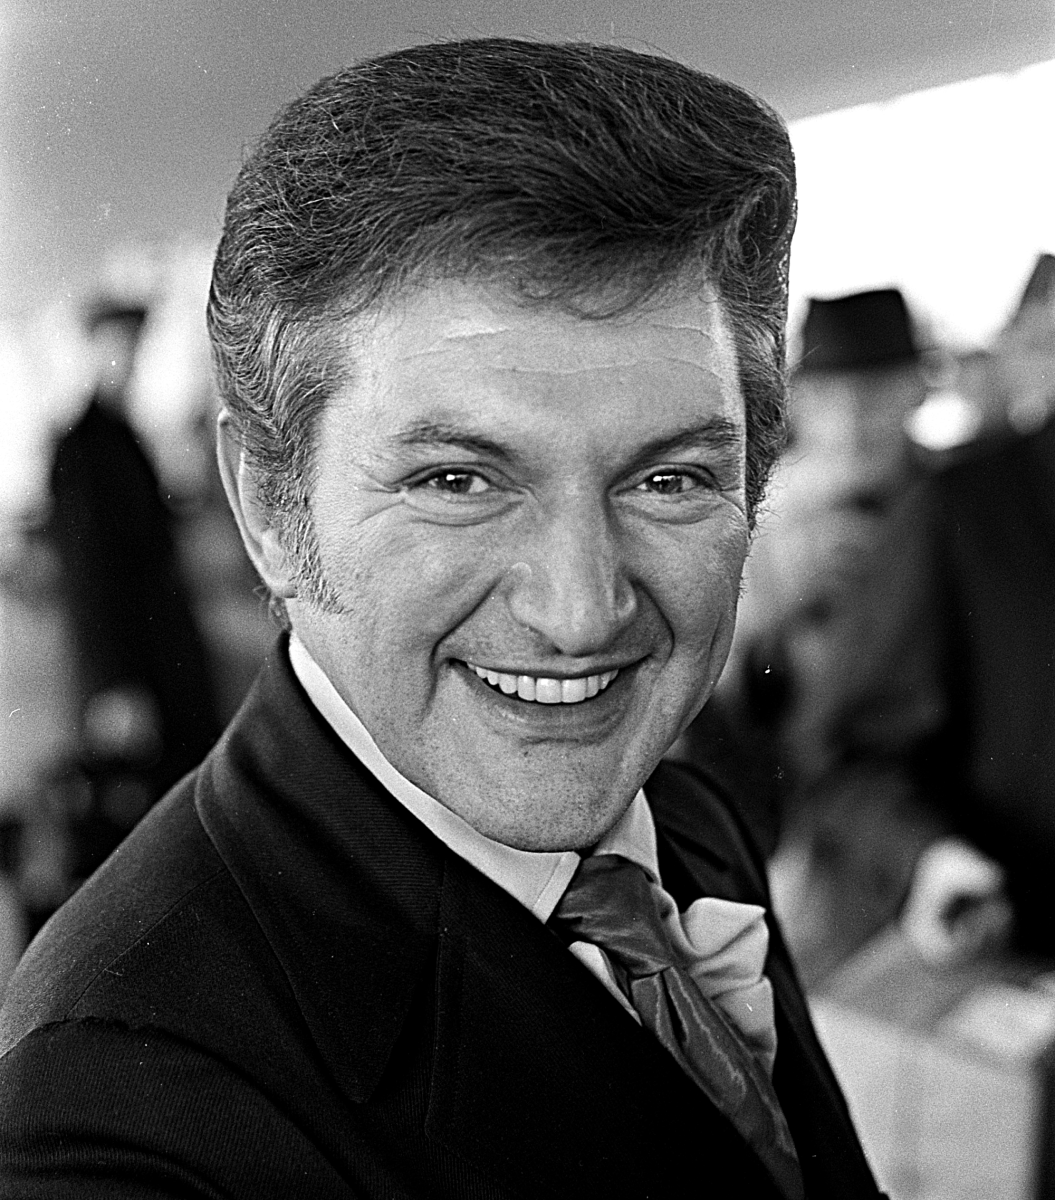 Liberace had a cherubic face when he was younger